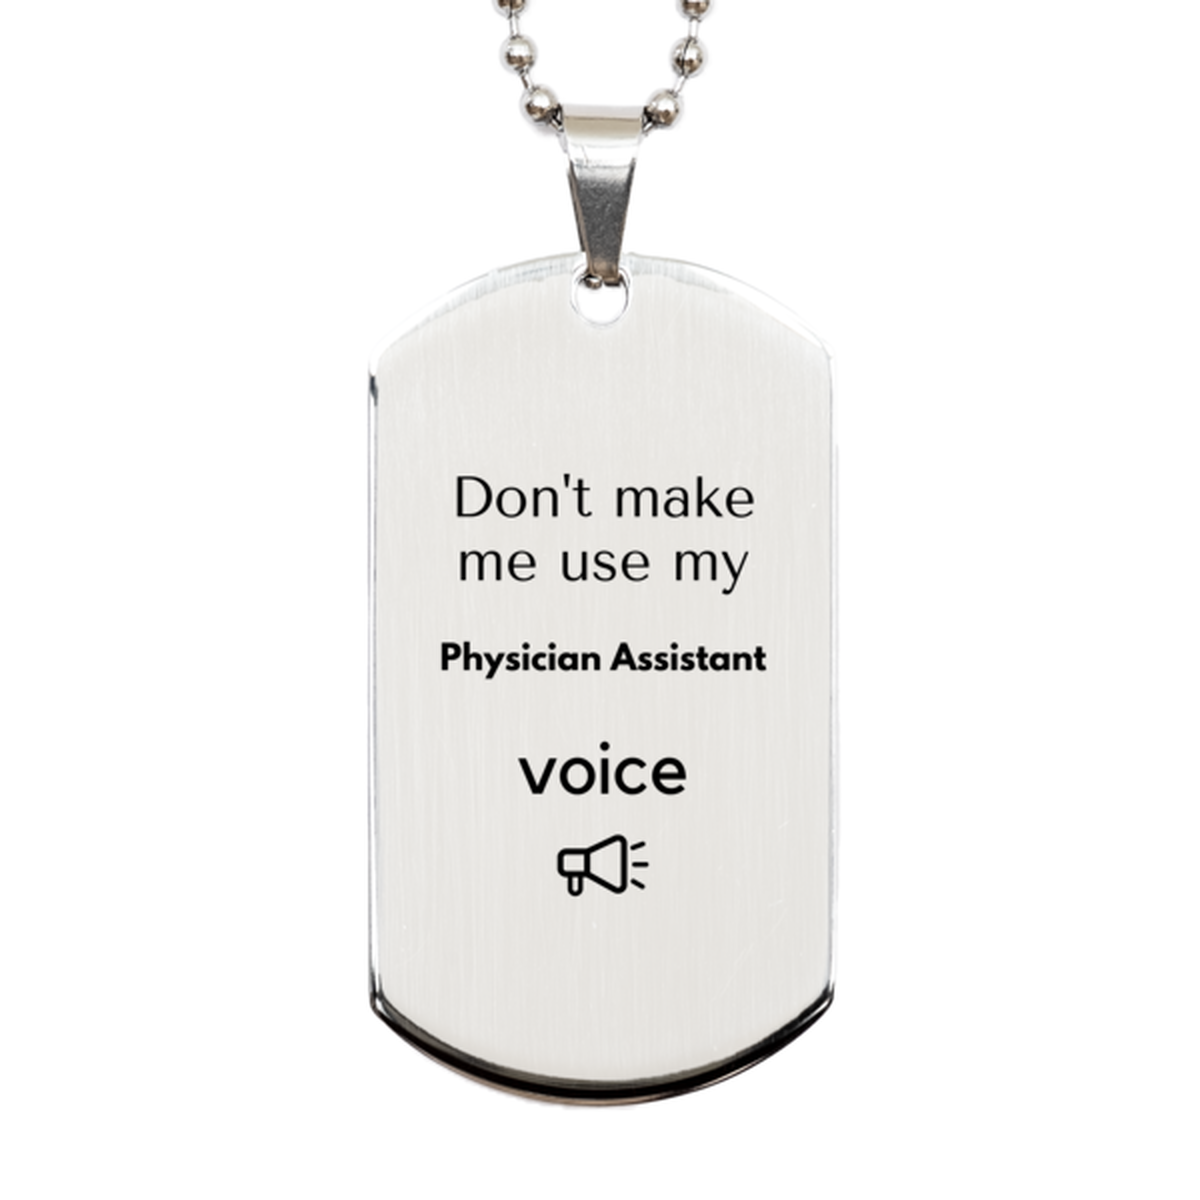 Don't make me use my Physician Assistant voice, Sarcasm Physician Assistant Gifts, Christmas Physician Assistant Silver Dog Tag Birthday Unique Gifts For Physician Assistant Coworkers, Men, Women, Colleague, Friends